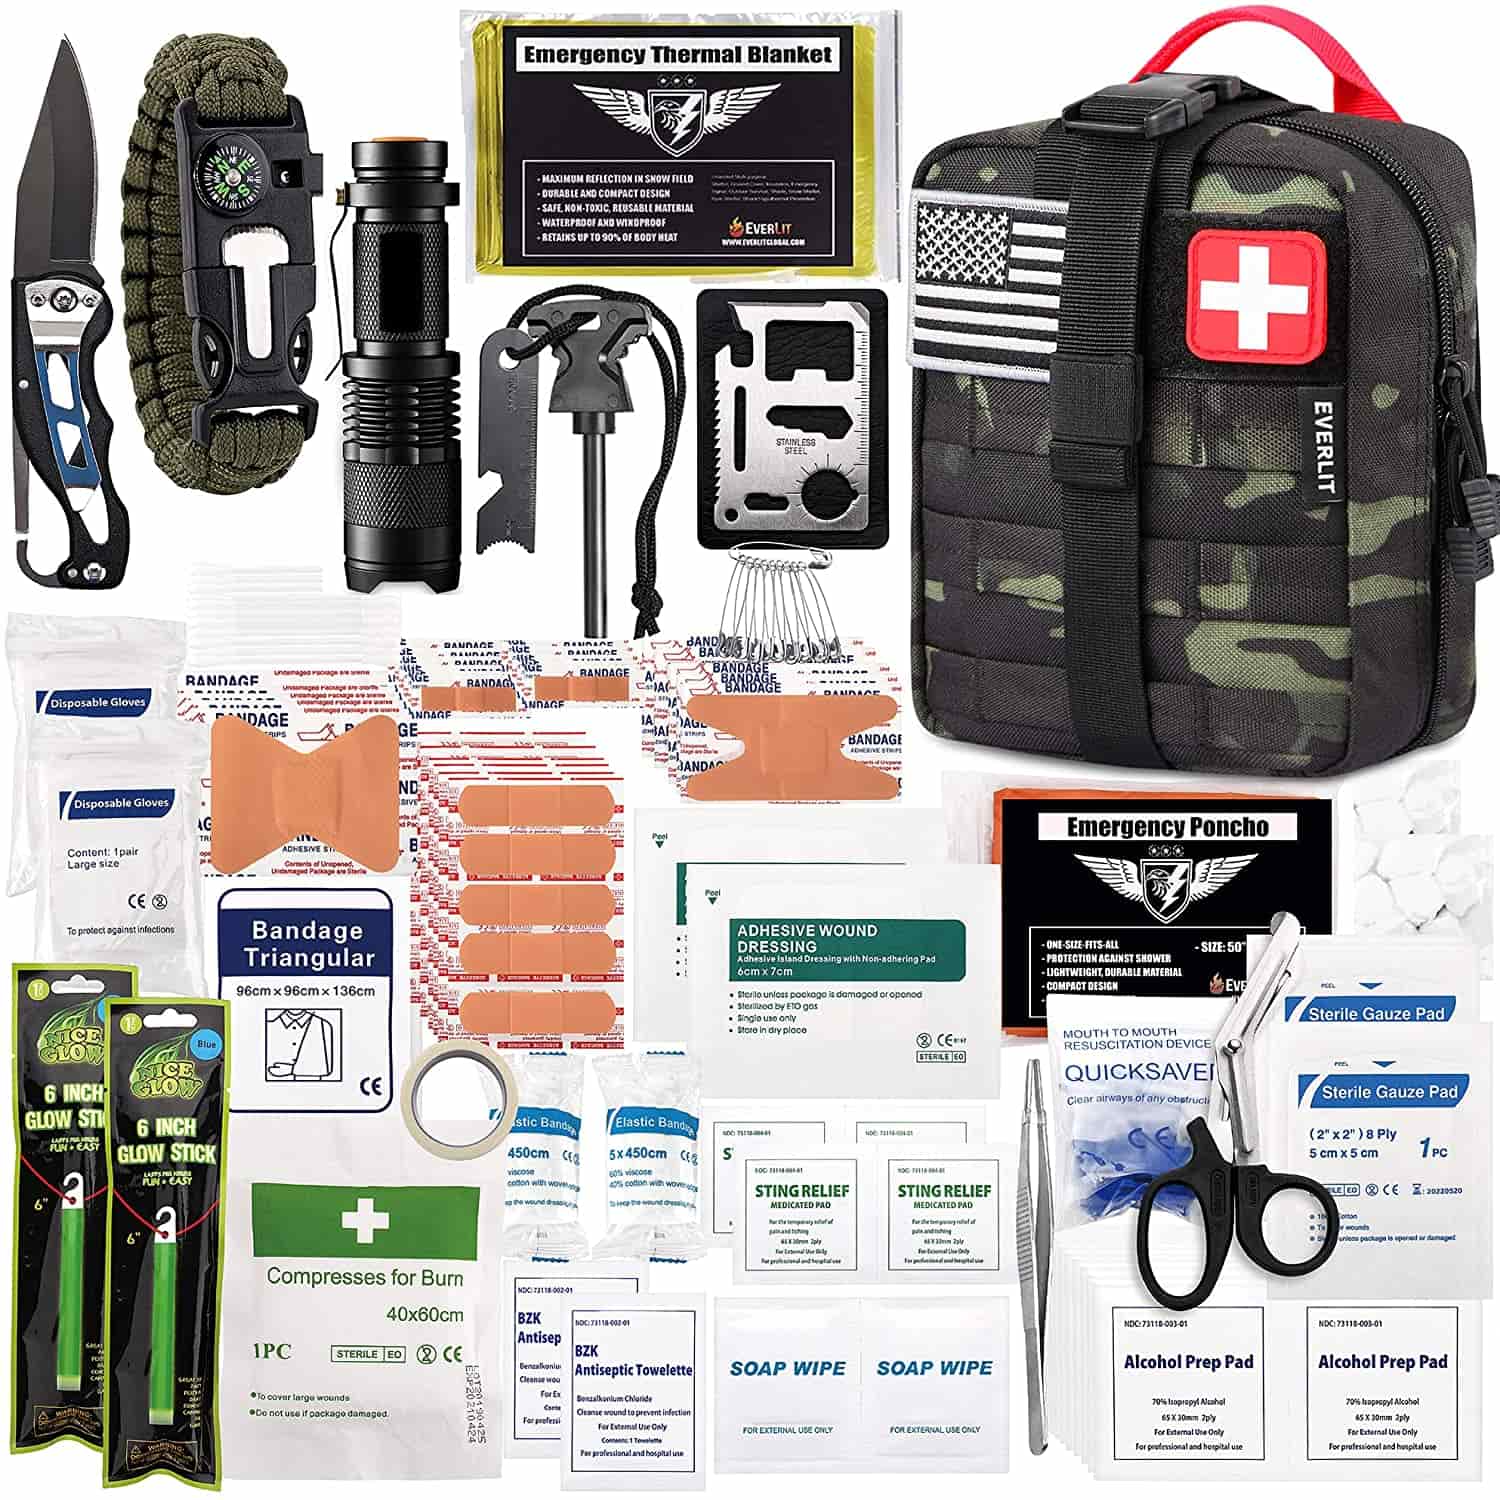 Black Camo Survival First Aid Kit Contains Contains 250 Piece First Aid Kit